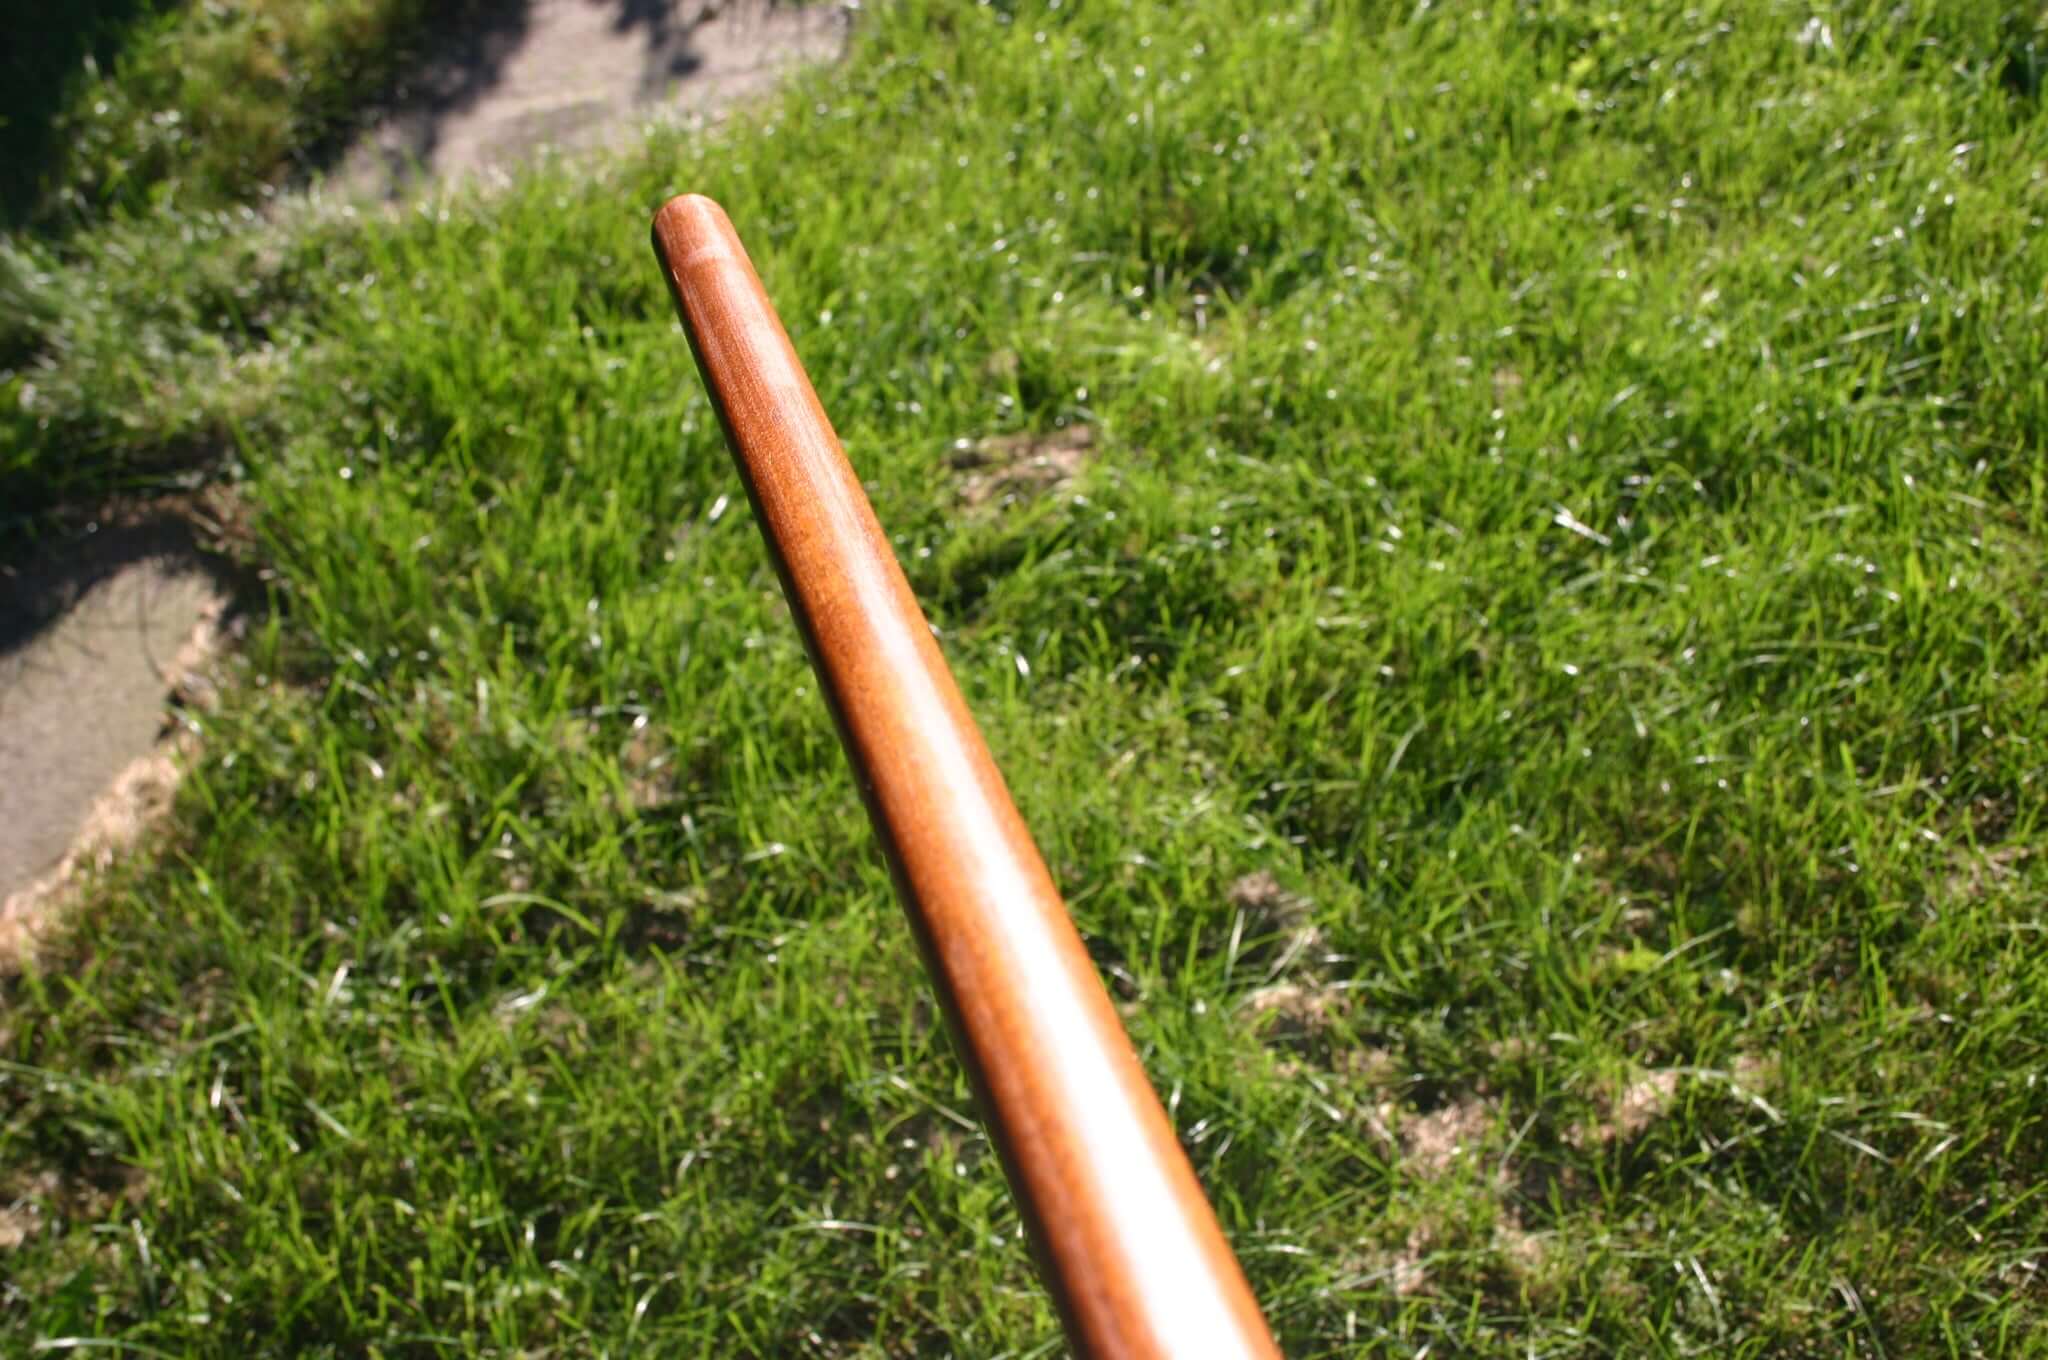 fitness staff for kata and contact made from ipe wood bo staff